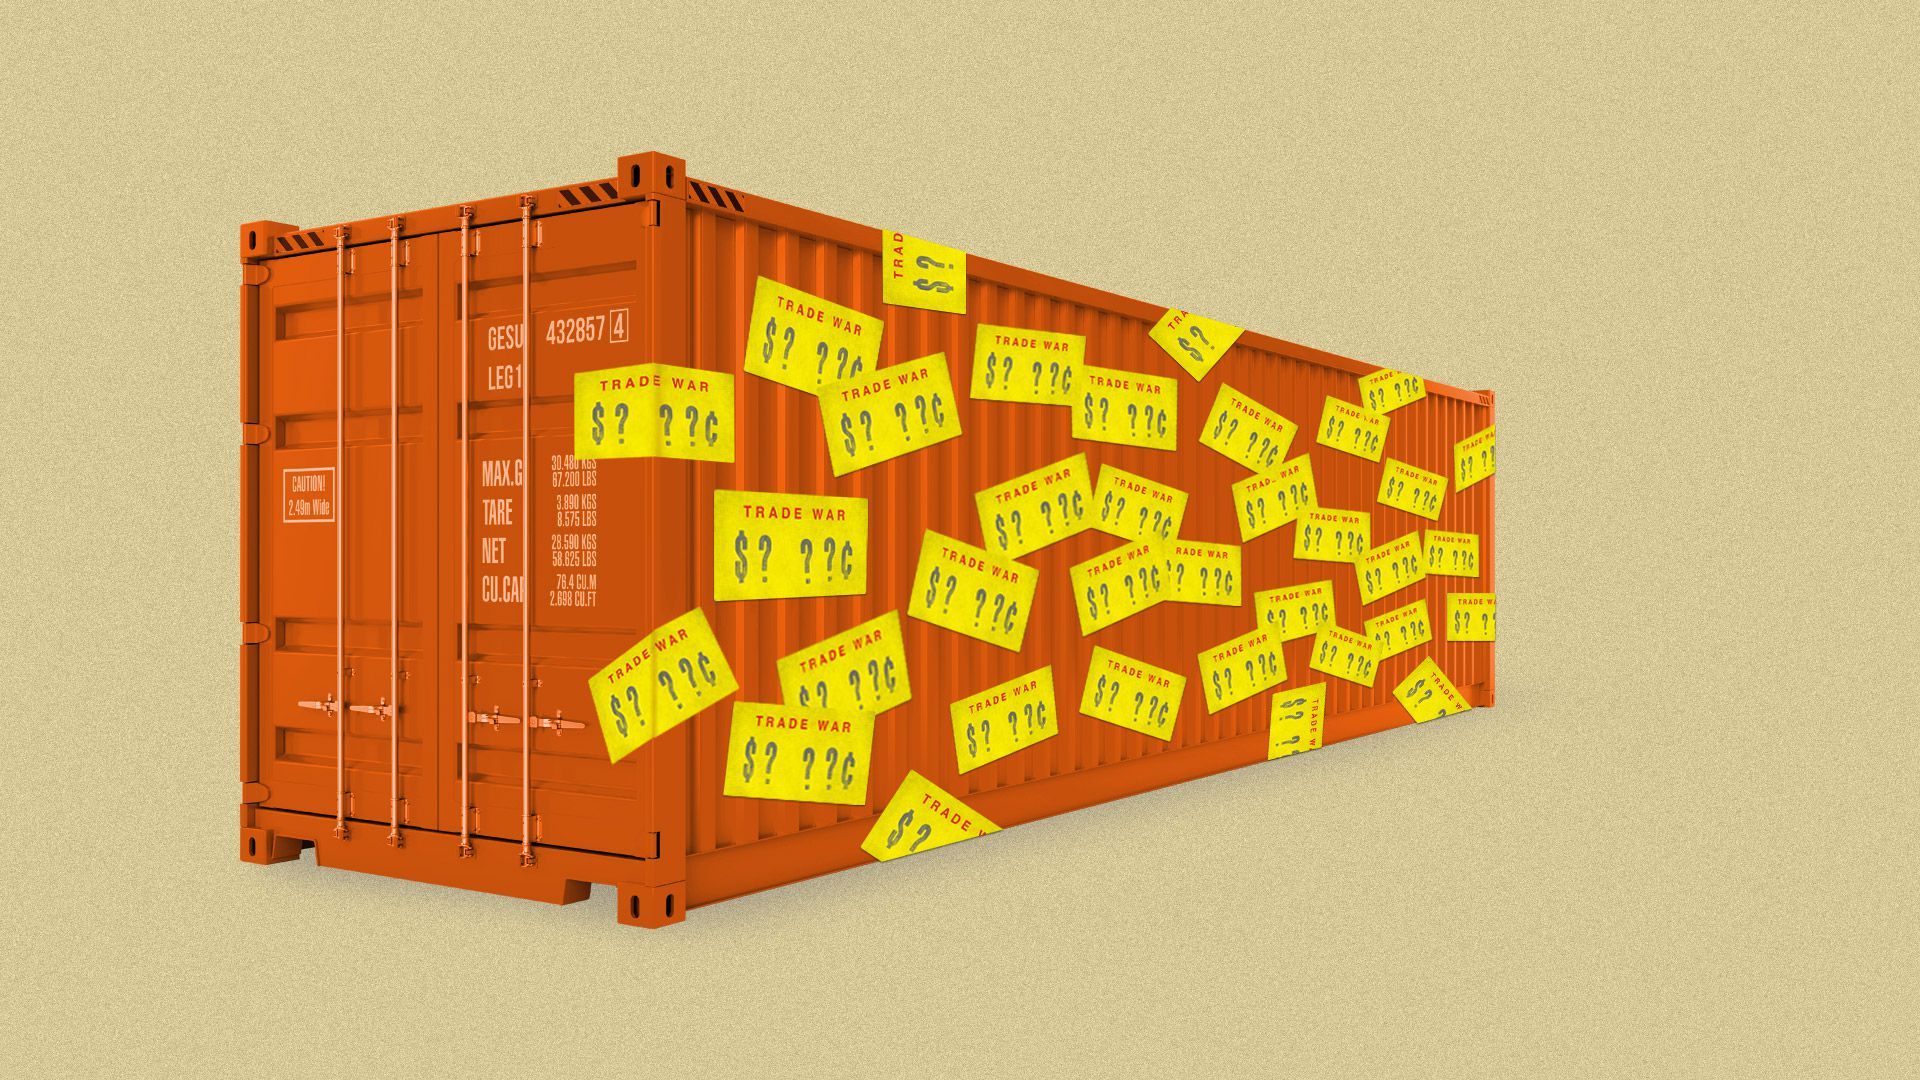 Illustration of orange freight container with yellow Trade War stickers stuck all over it